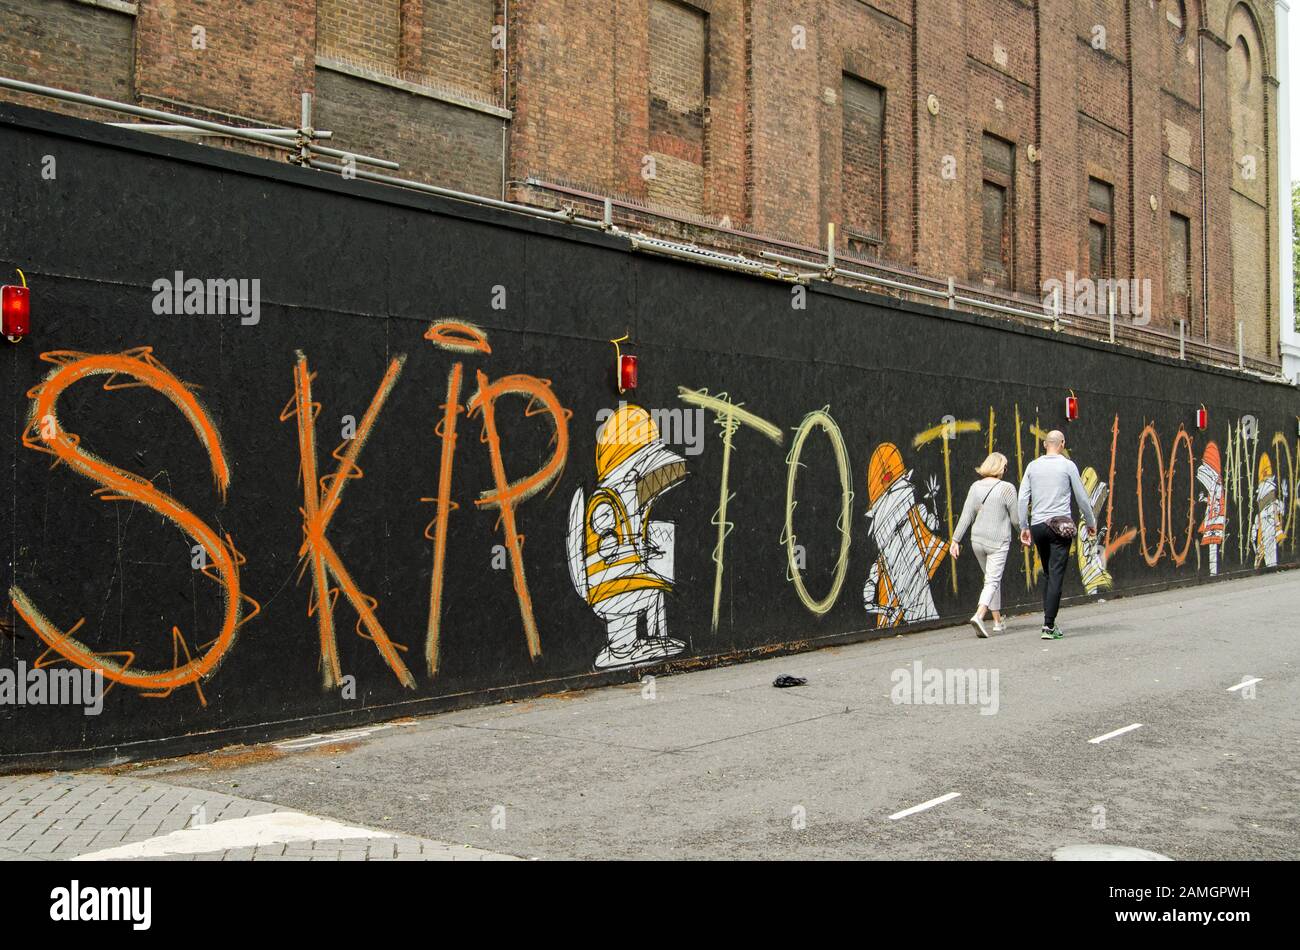 London, UK - July 20, 2019: A hoarding decorated with figures and lettering by the street artist Nathan Bowen next to the Old Vic Theatre in Lambeth, Stock Photo